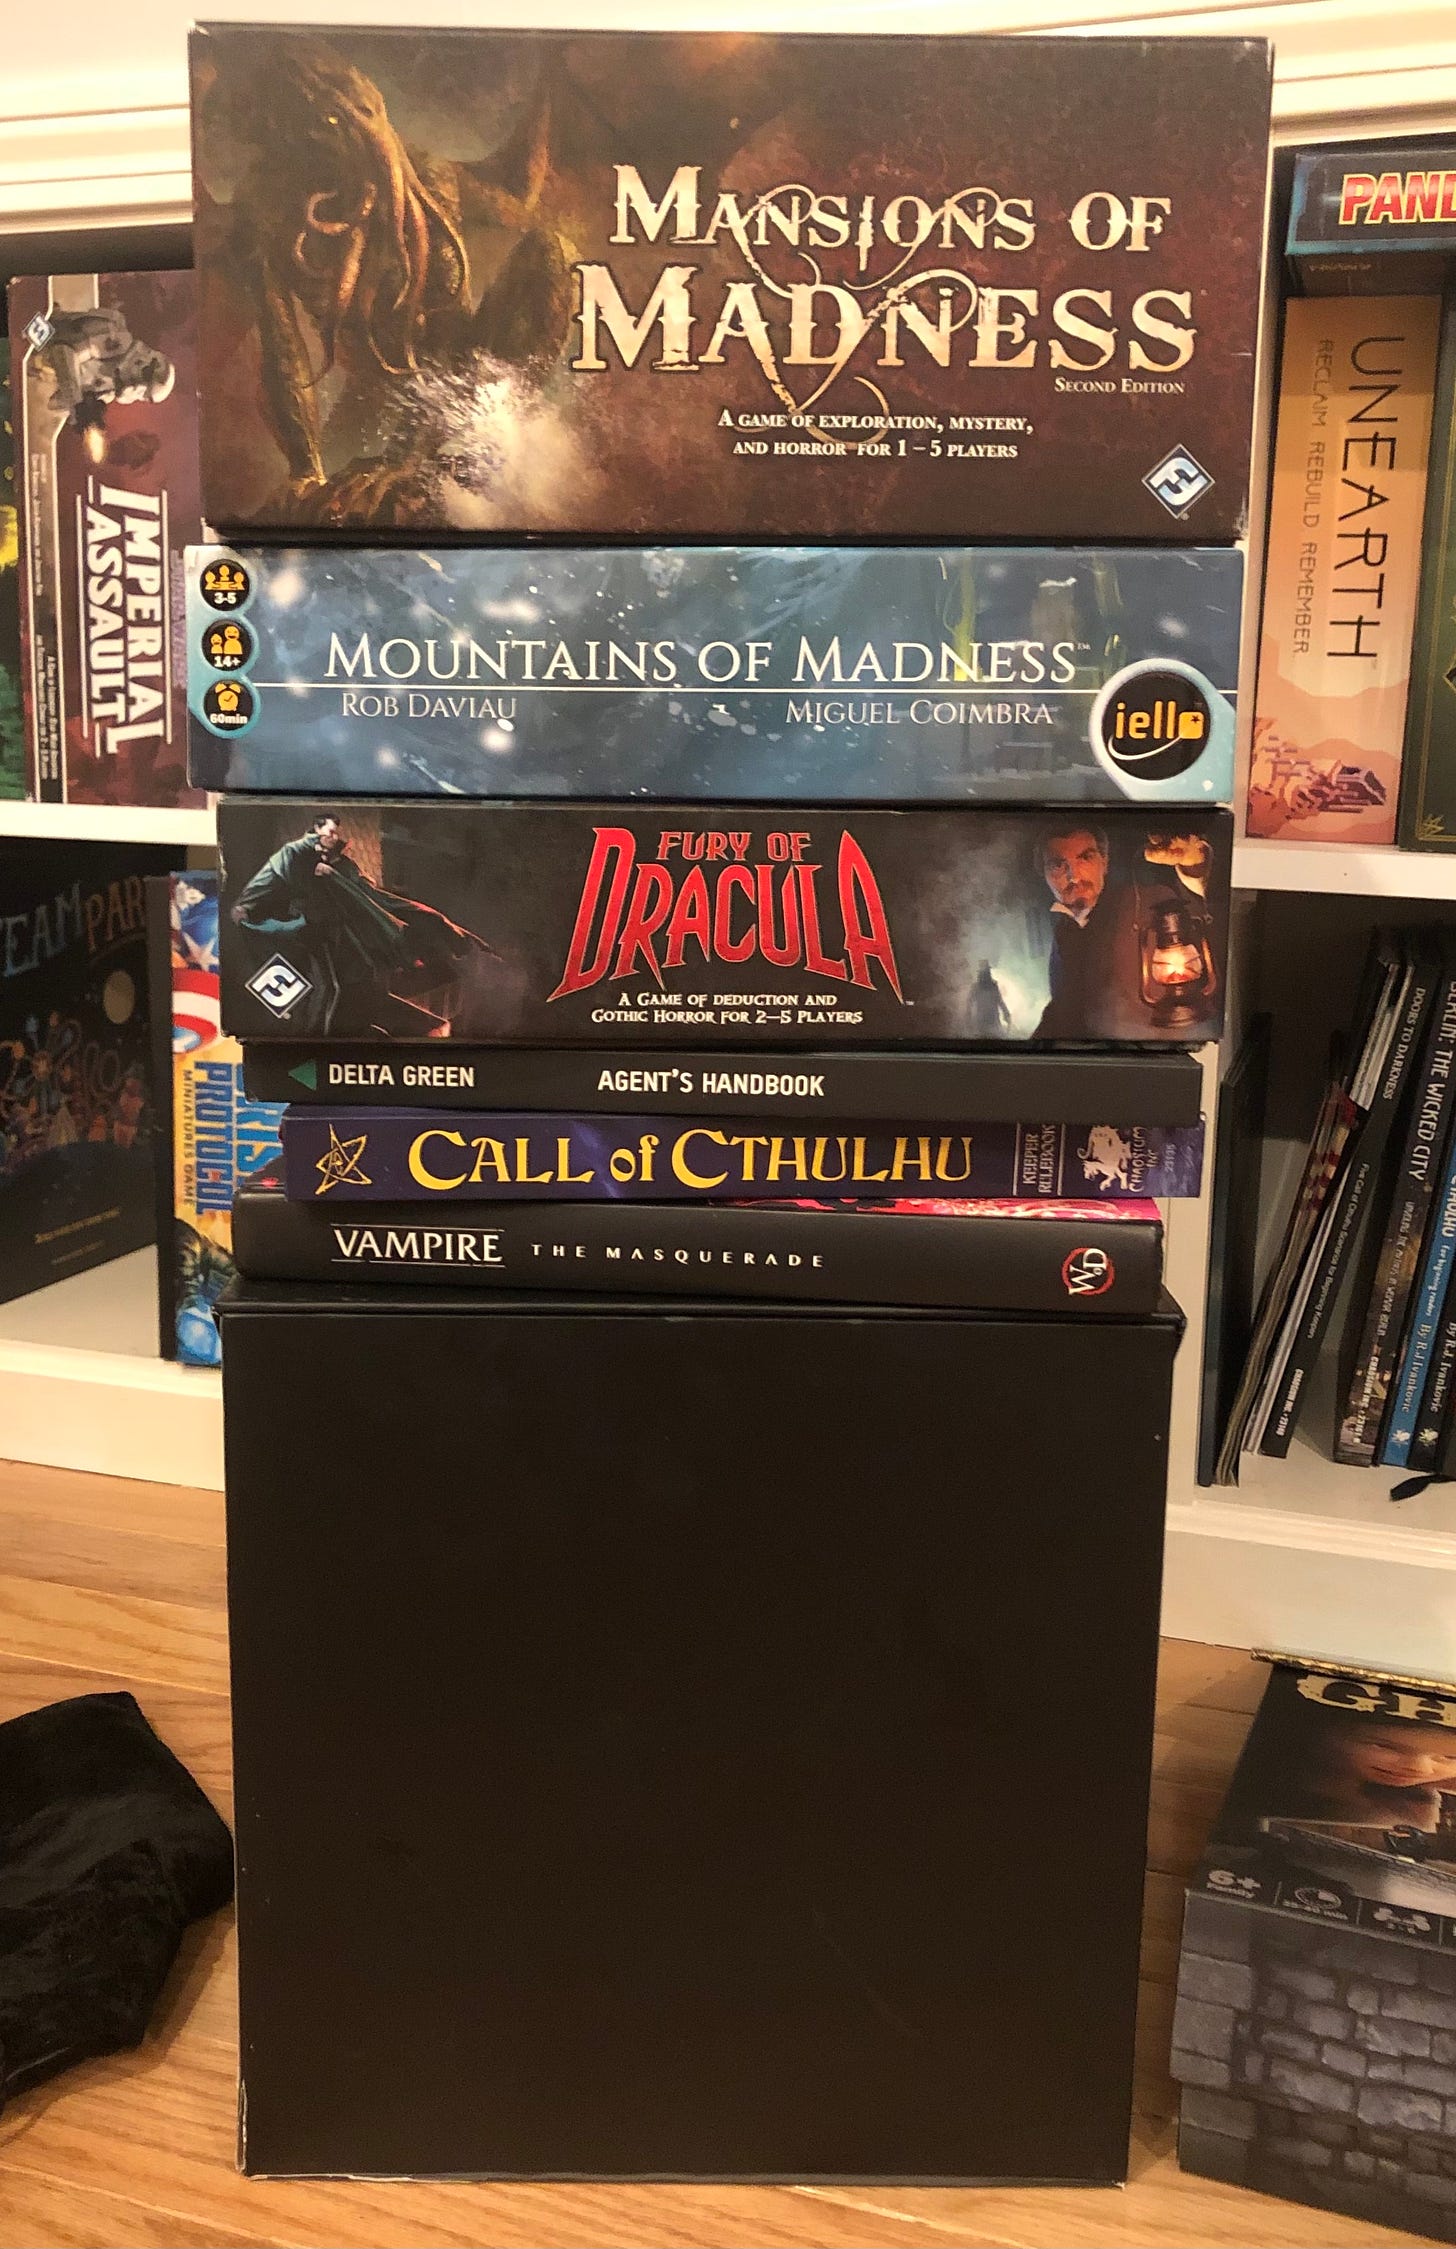 Mansions and Mountains of Madness, Fury of Dracula, Delta Green, Call of Cthulhu, Vampire: The Masquerade, Invisible Sun